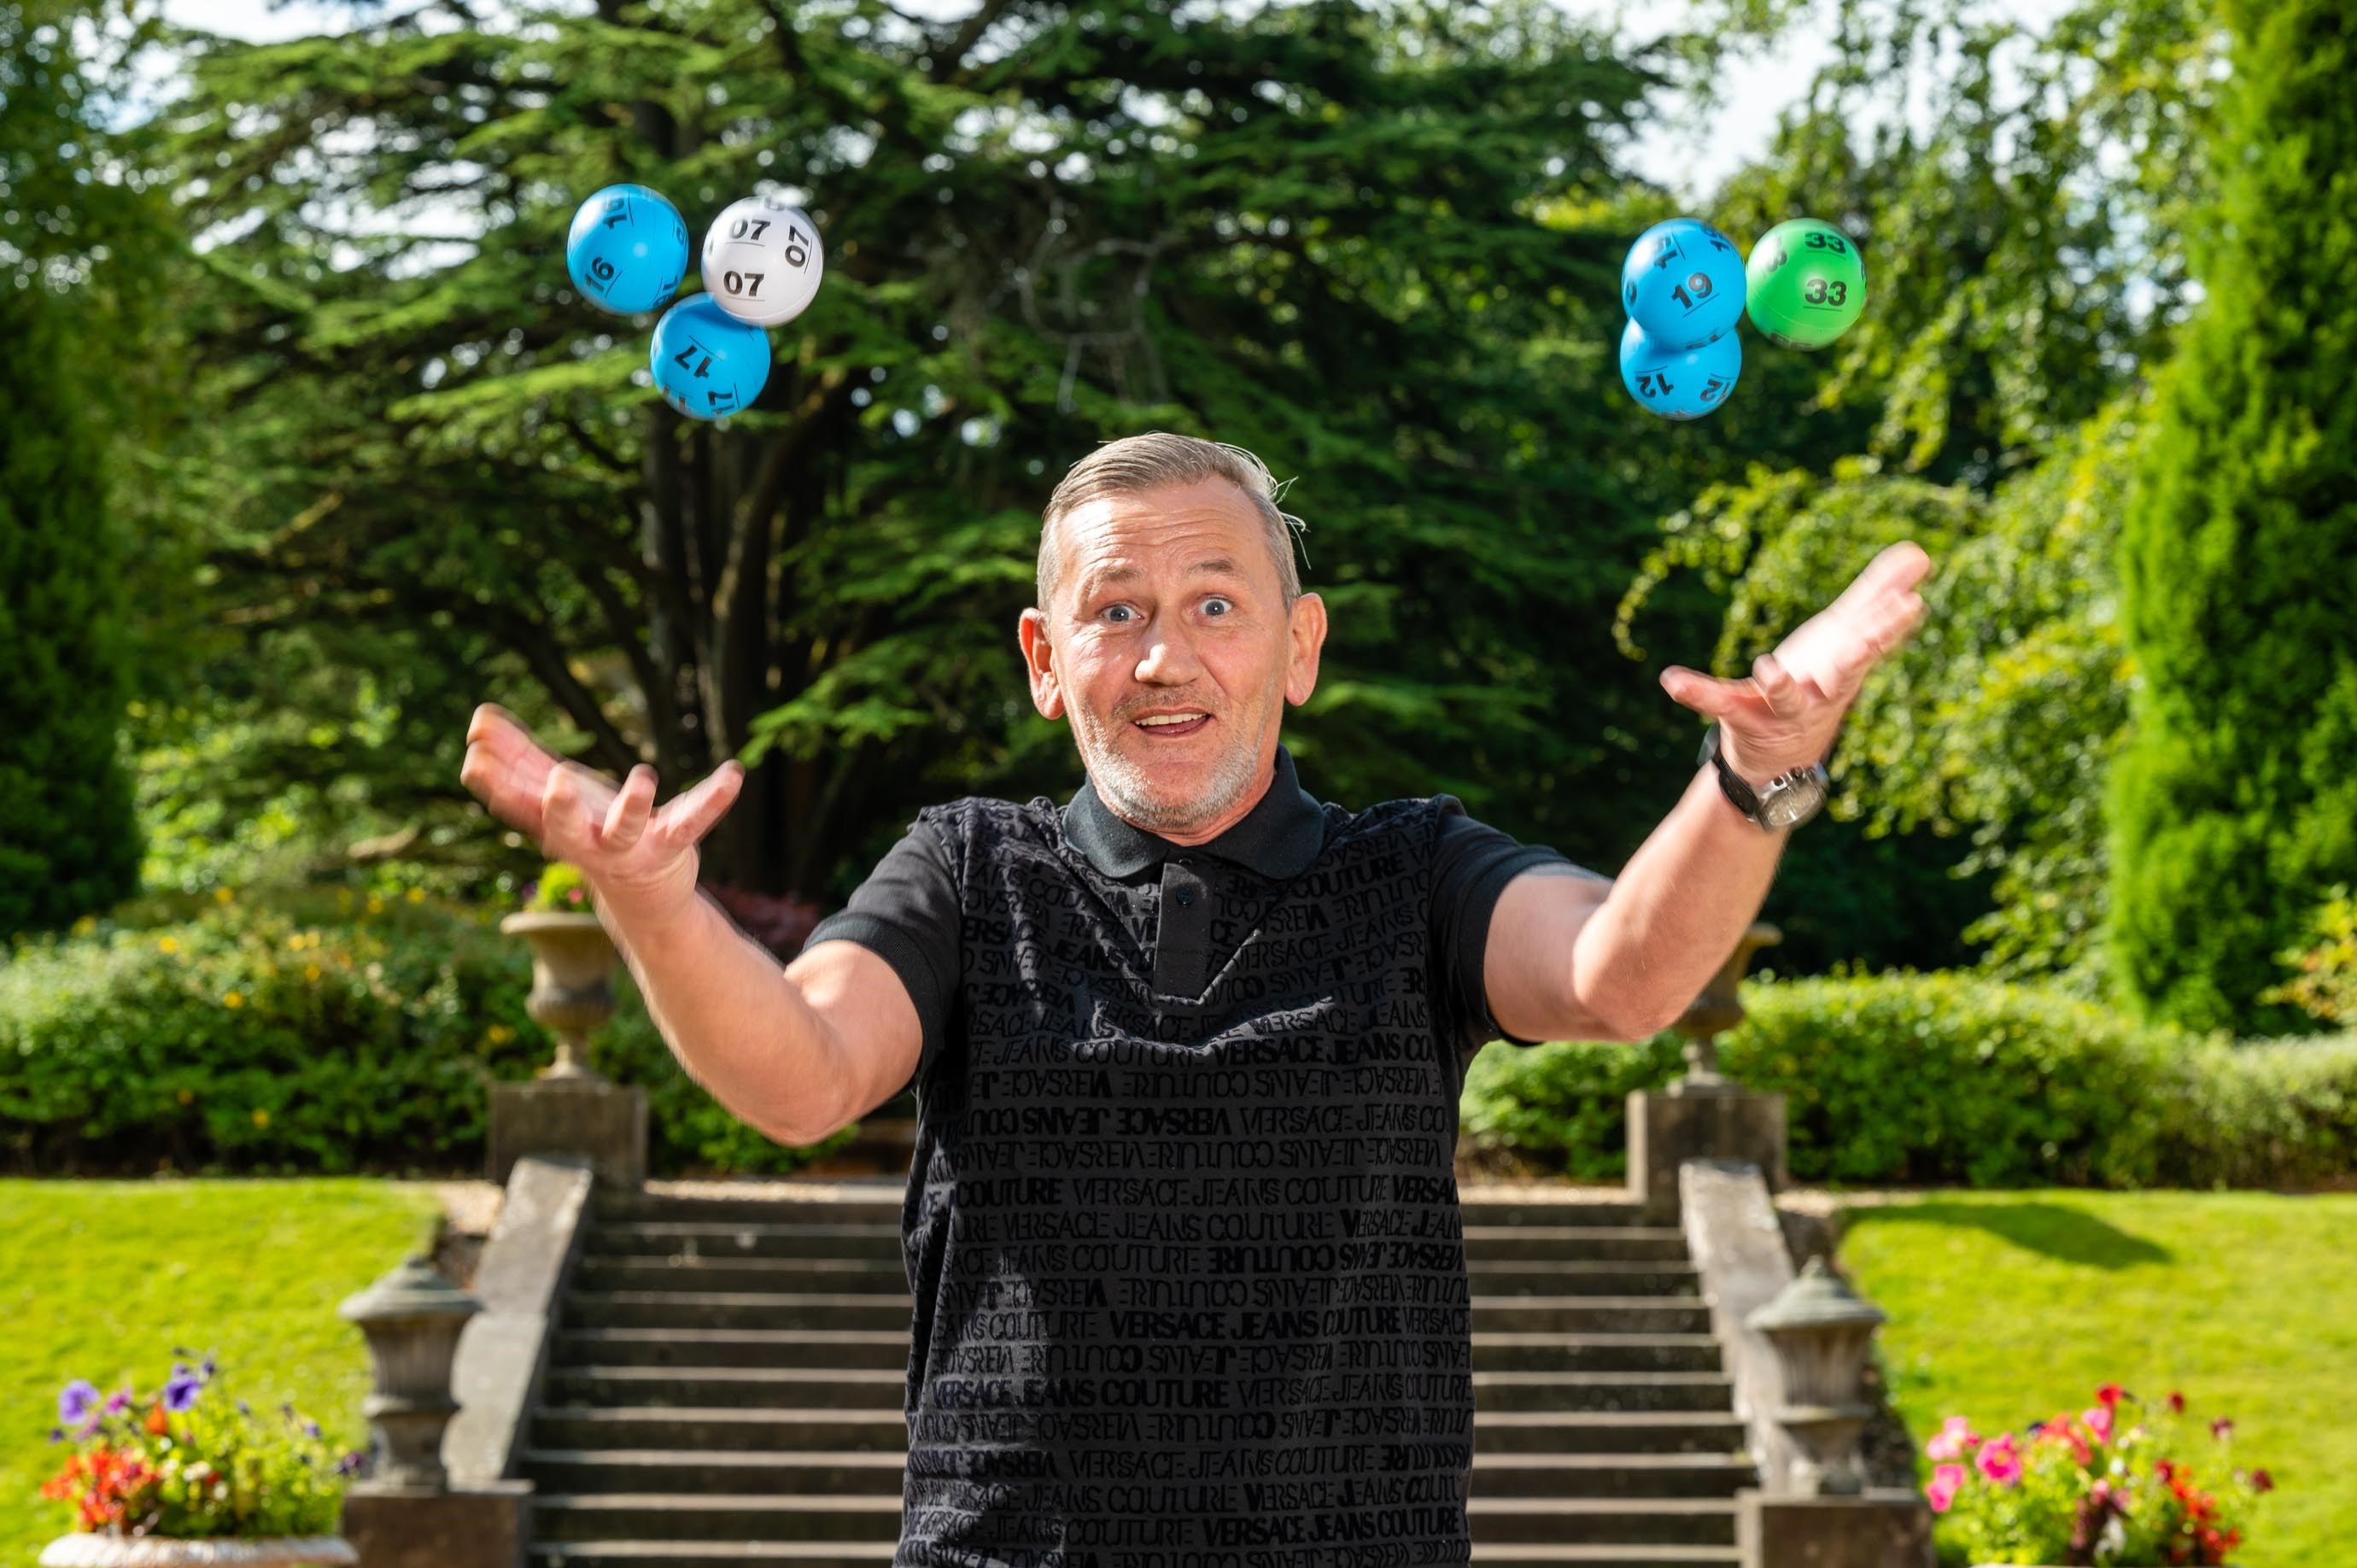 Robert Cameron, 53, won £1m in the lottery after he followed the advice of his late mother.